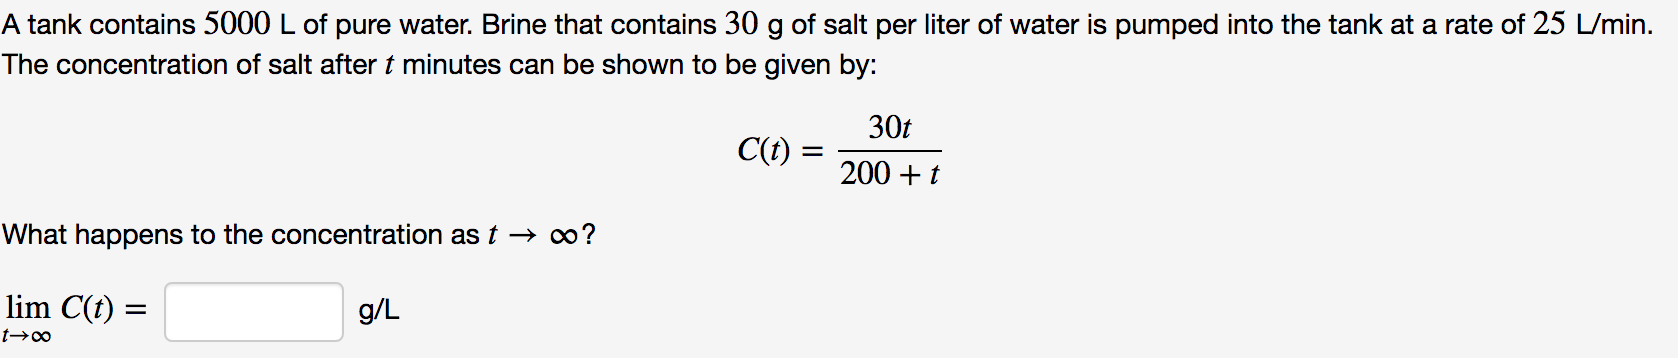 A tank contains 5000 L of pure water. Brine that contains 30 g of salt per liter of water is pumped into the tank at a rate of 25 L/min
The concentration of salt after t minutes can be shown to be given by:
30t
C(t)
200t
What happens to the concentration as t - oo?
lim C(t)
g/L
t-oo
